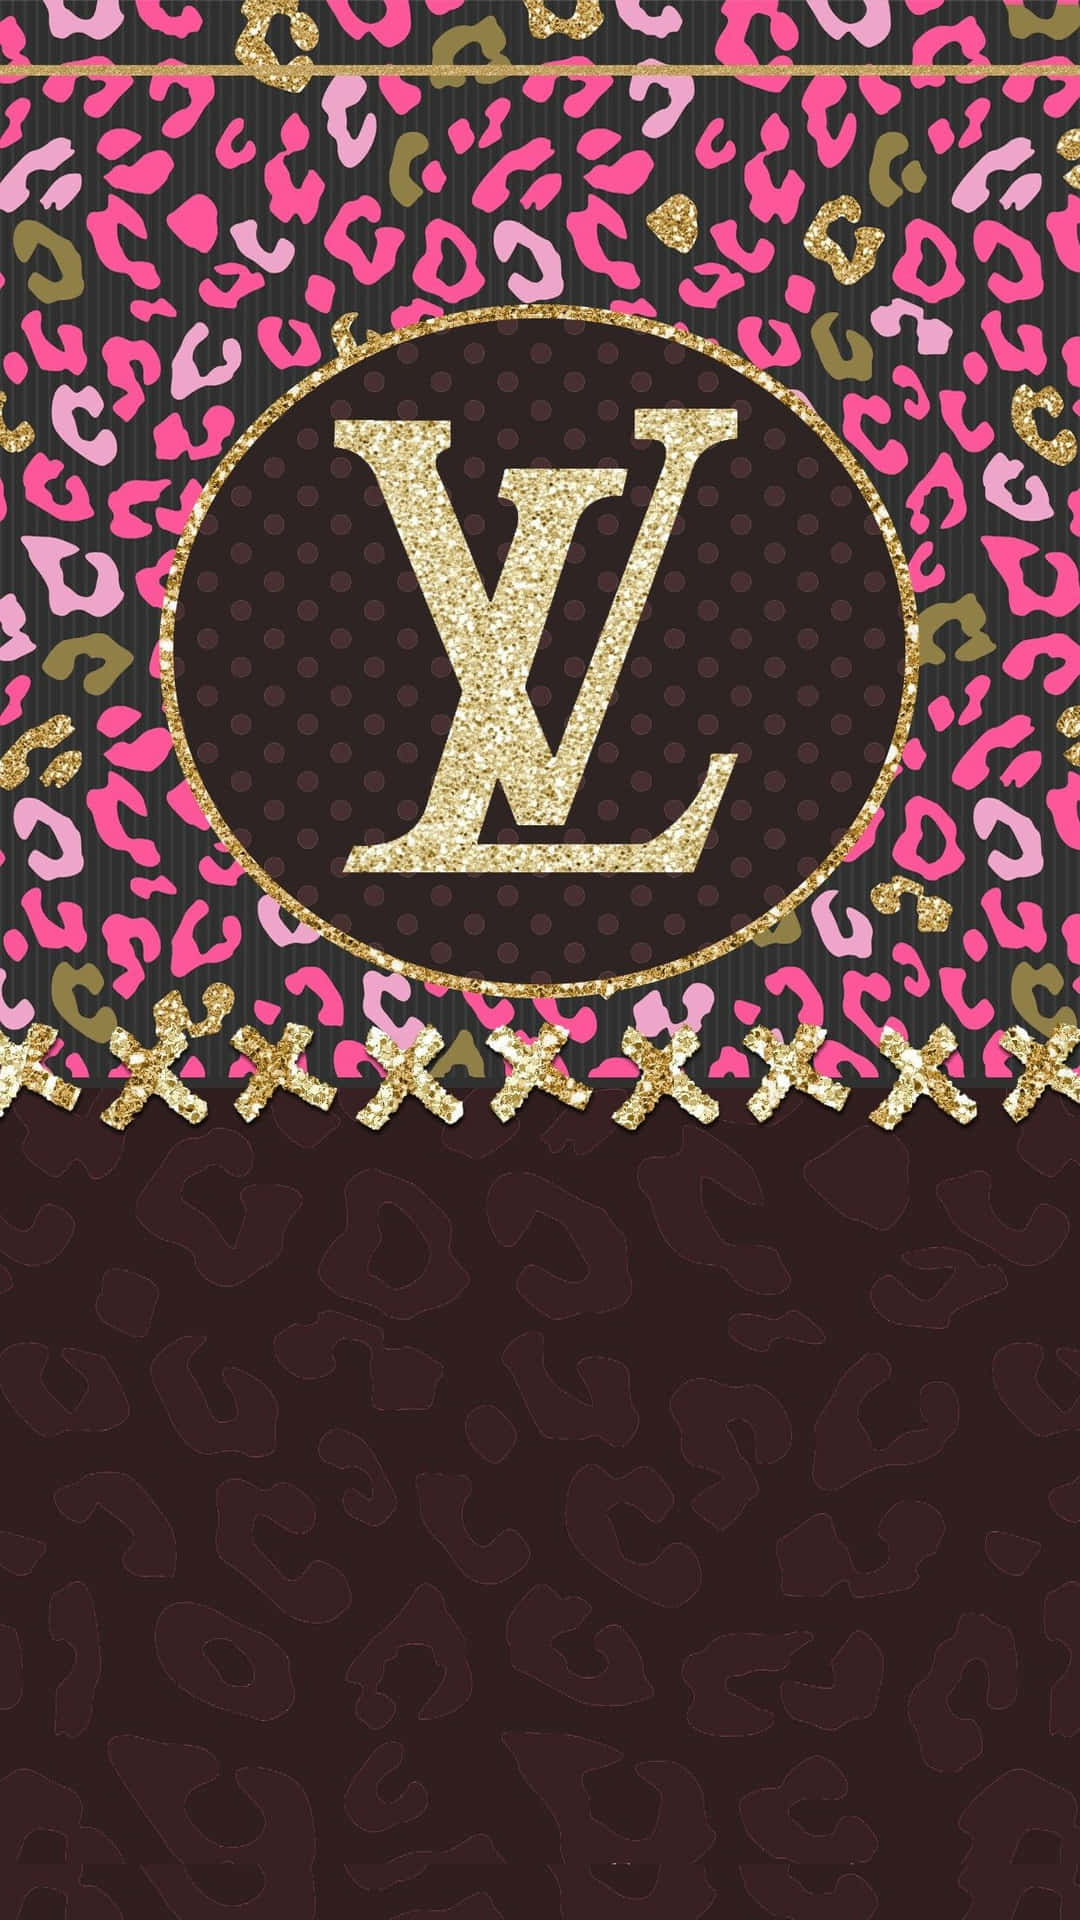 Download The always stylish Louis Vuitton Iphone Wallpaper